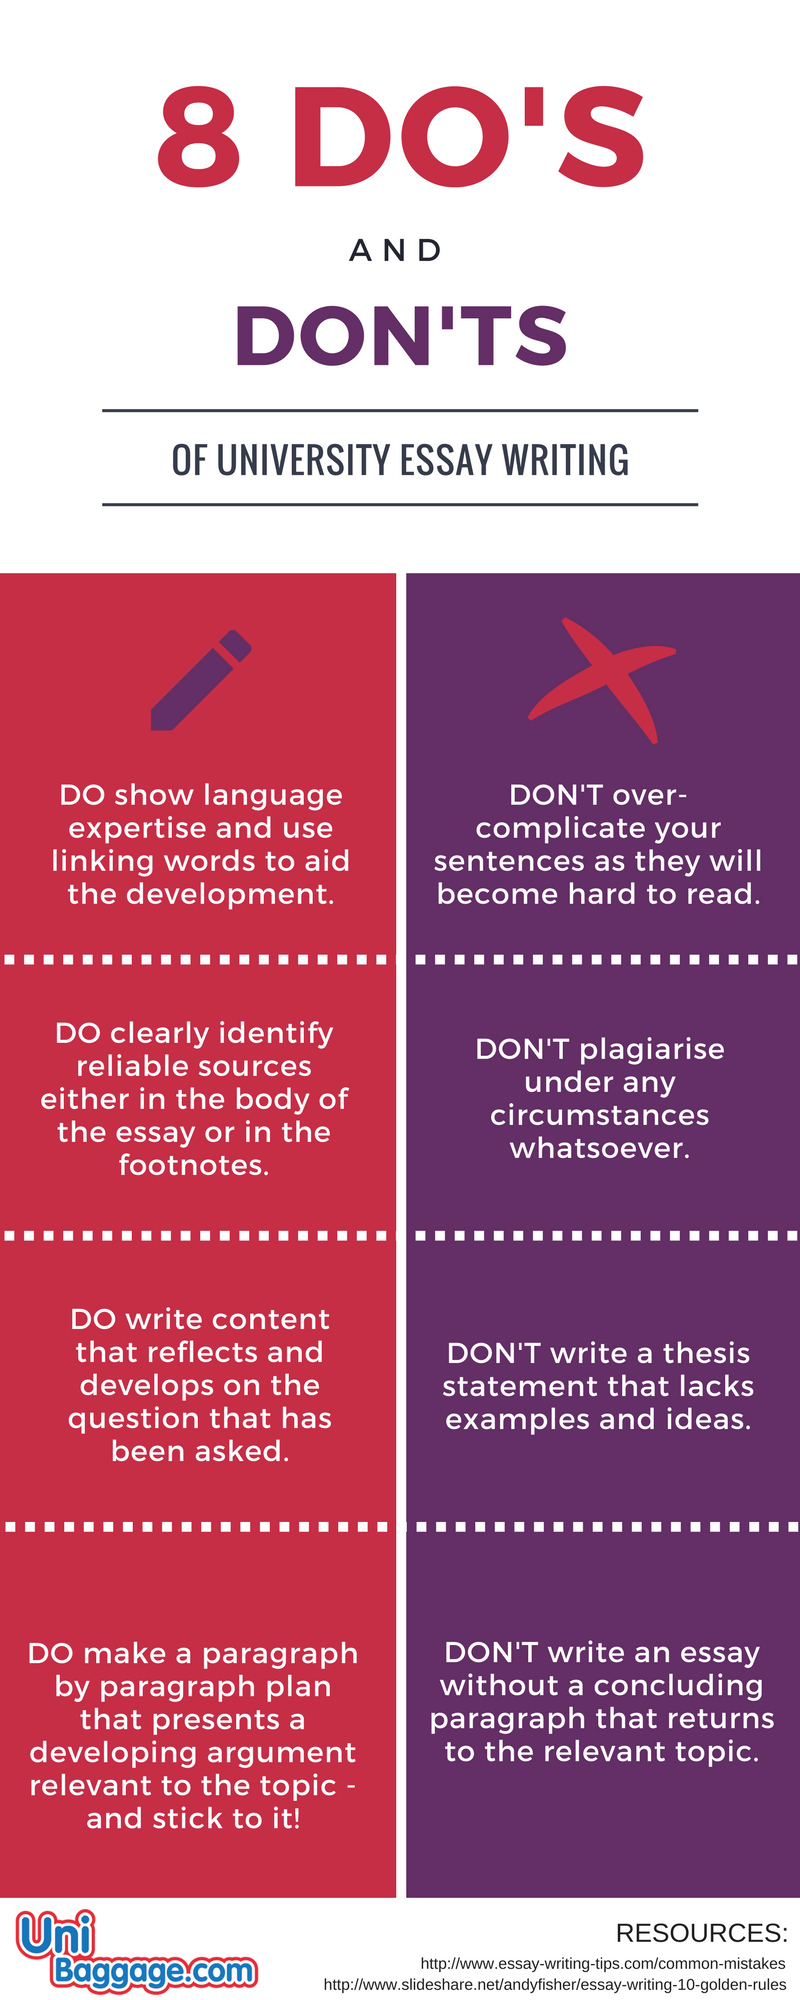 synthesis essay do's and don'ts